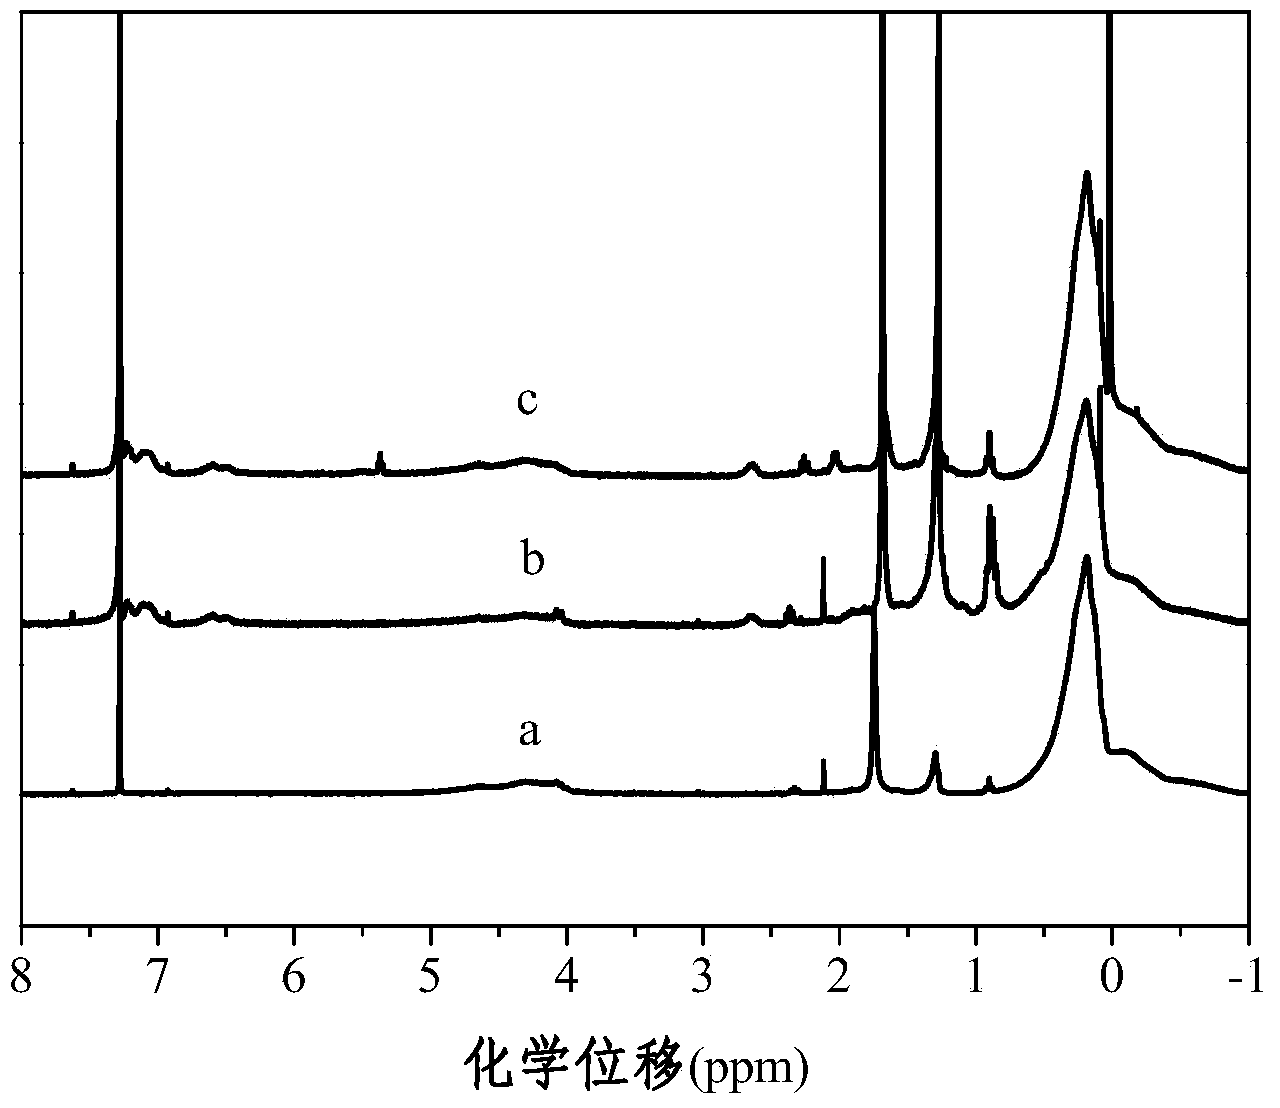 Side-chain aryl conjugated organic light-emitting material and preparation method thereof